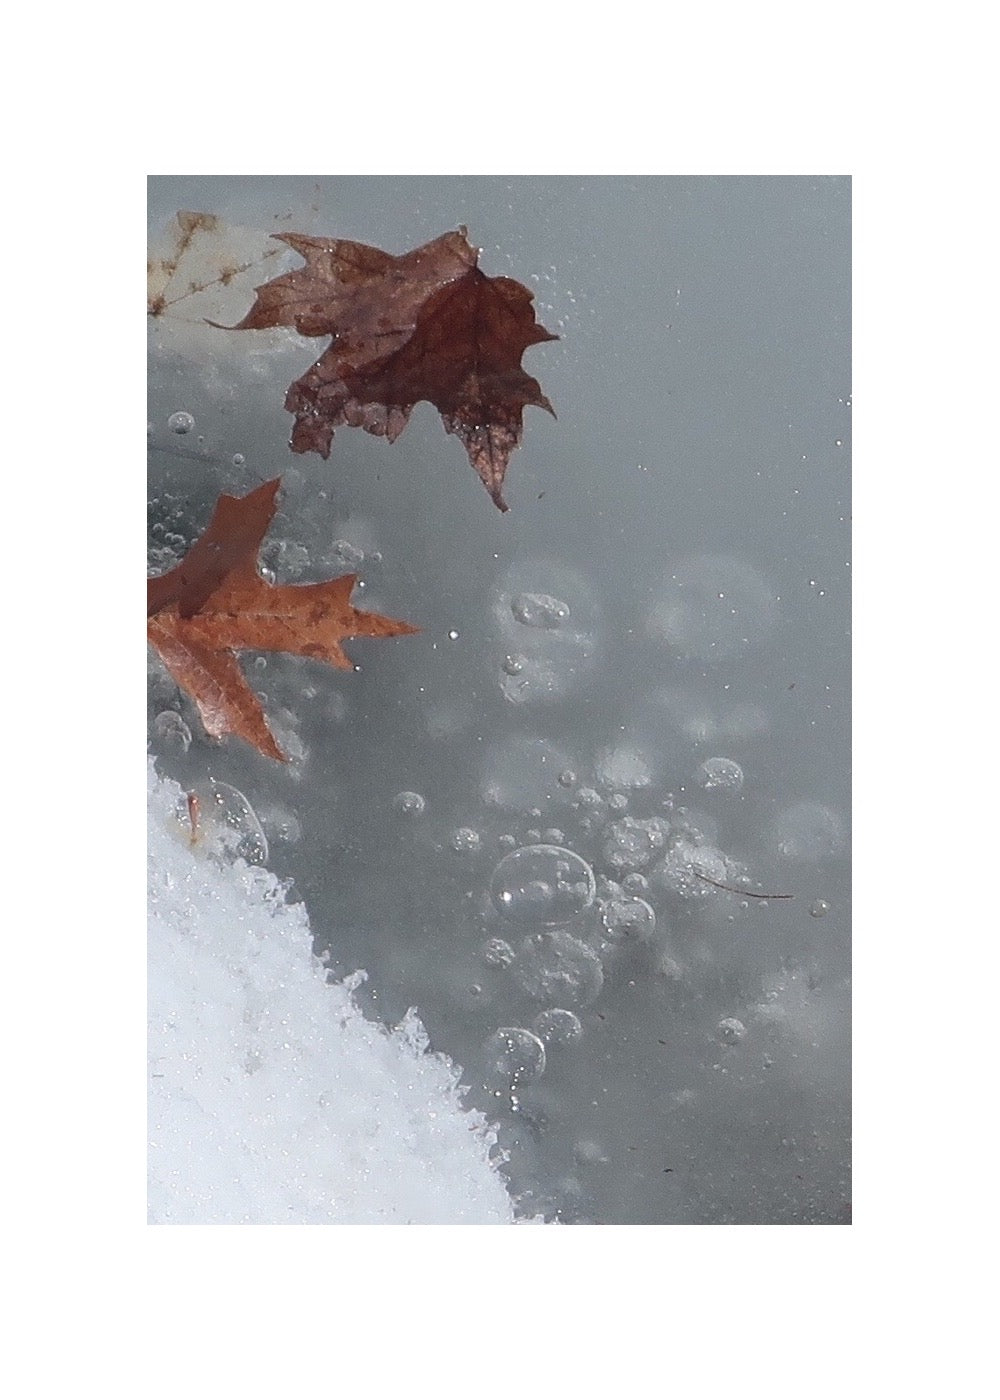 Ambiguity Series #4 (Air Bubbles and Leaves) 2/20